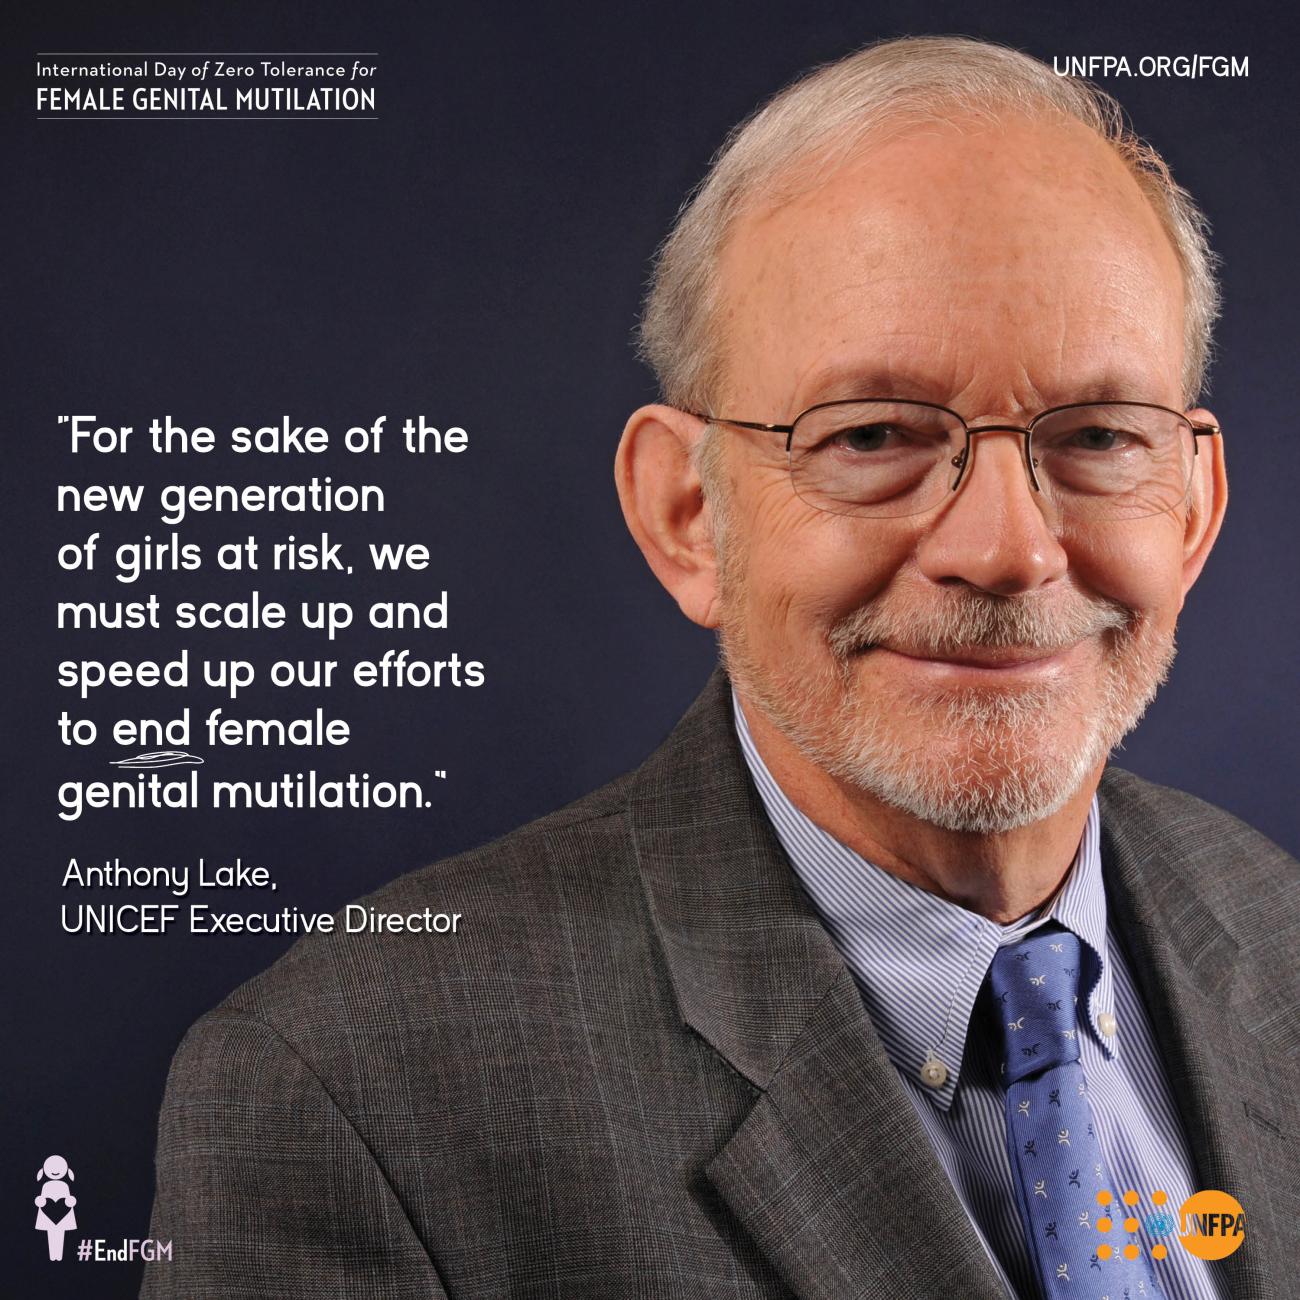 We must put an end to FGM 